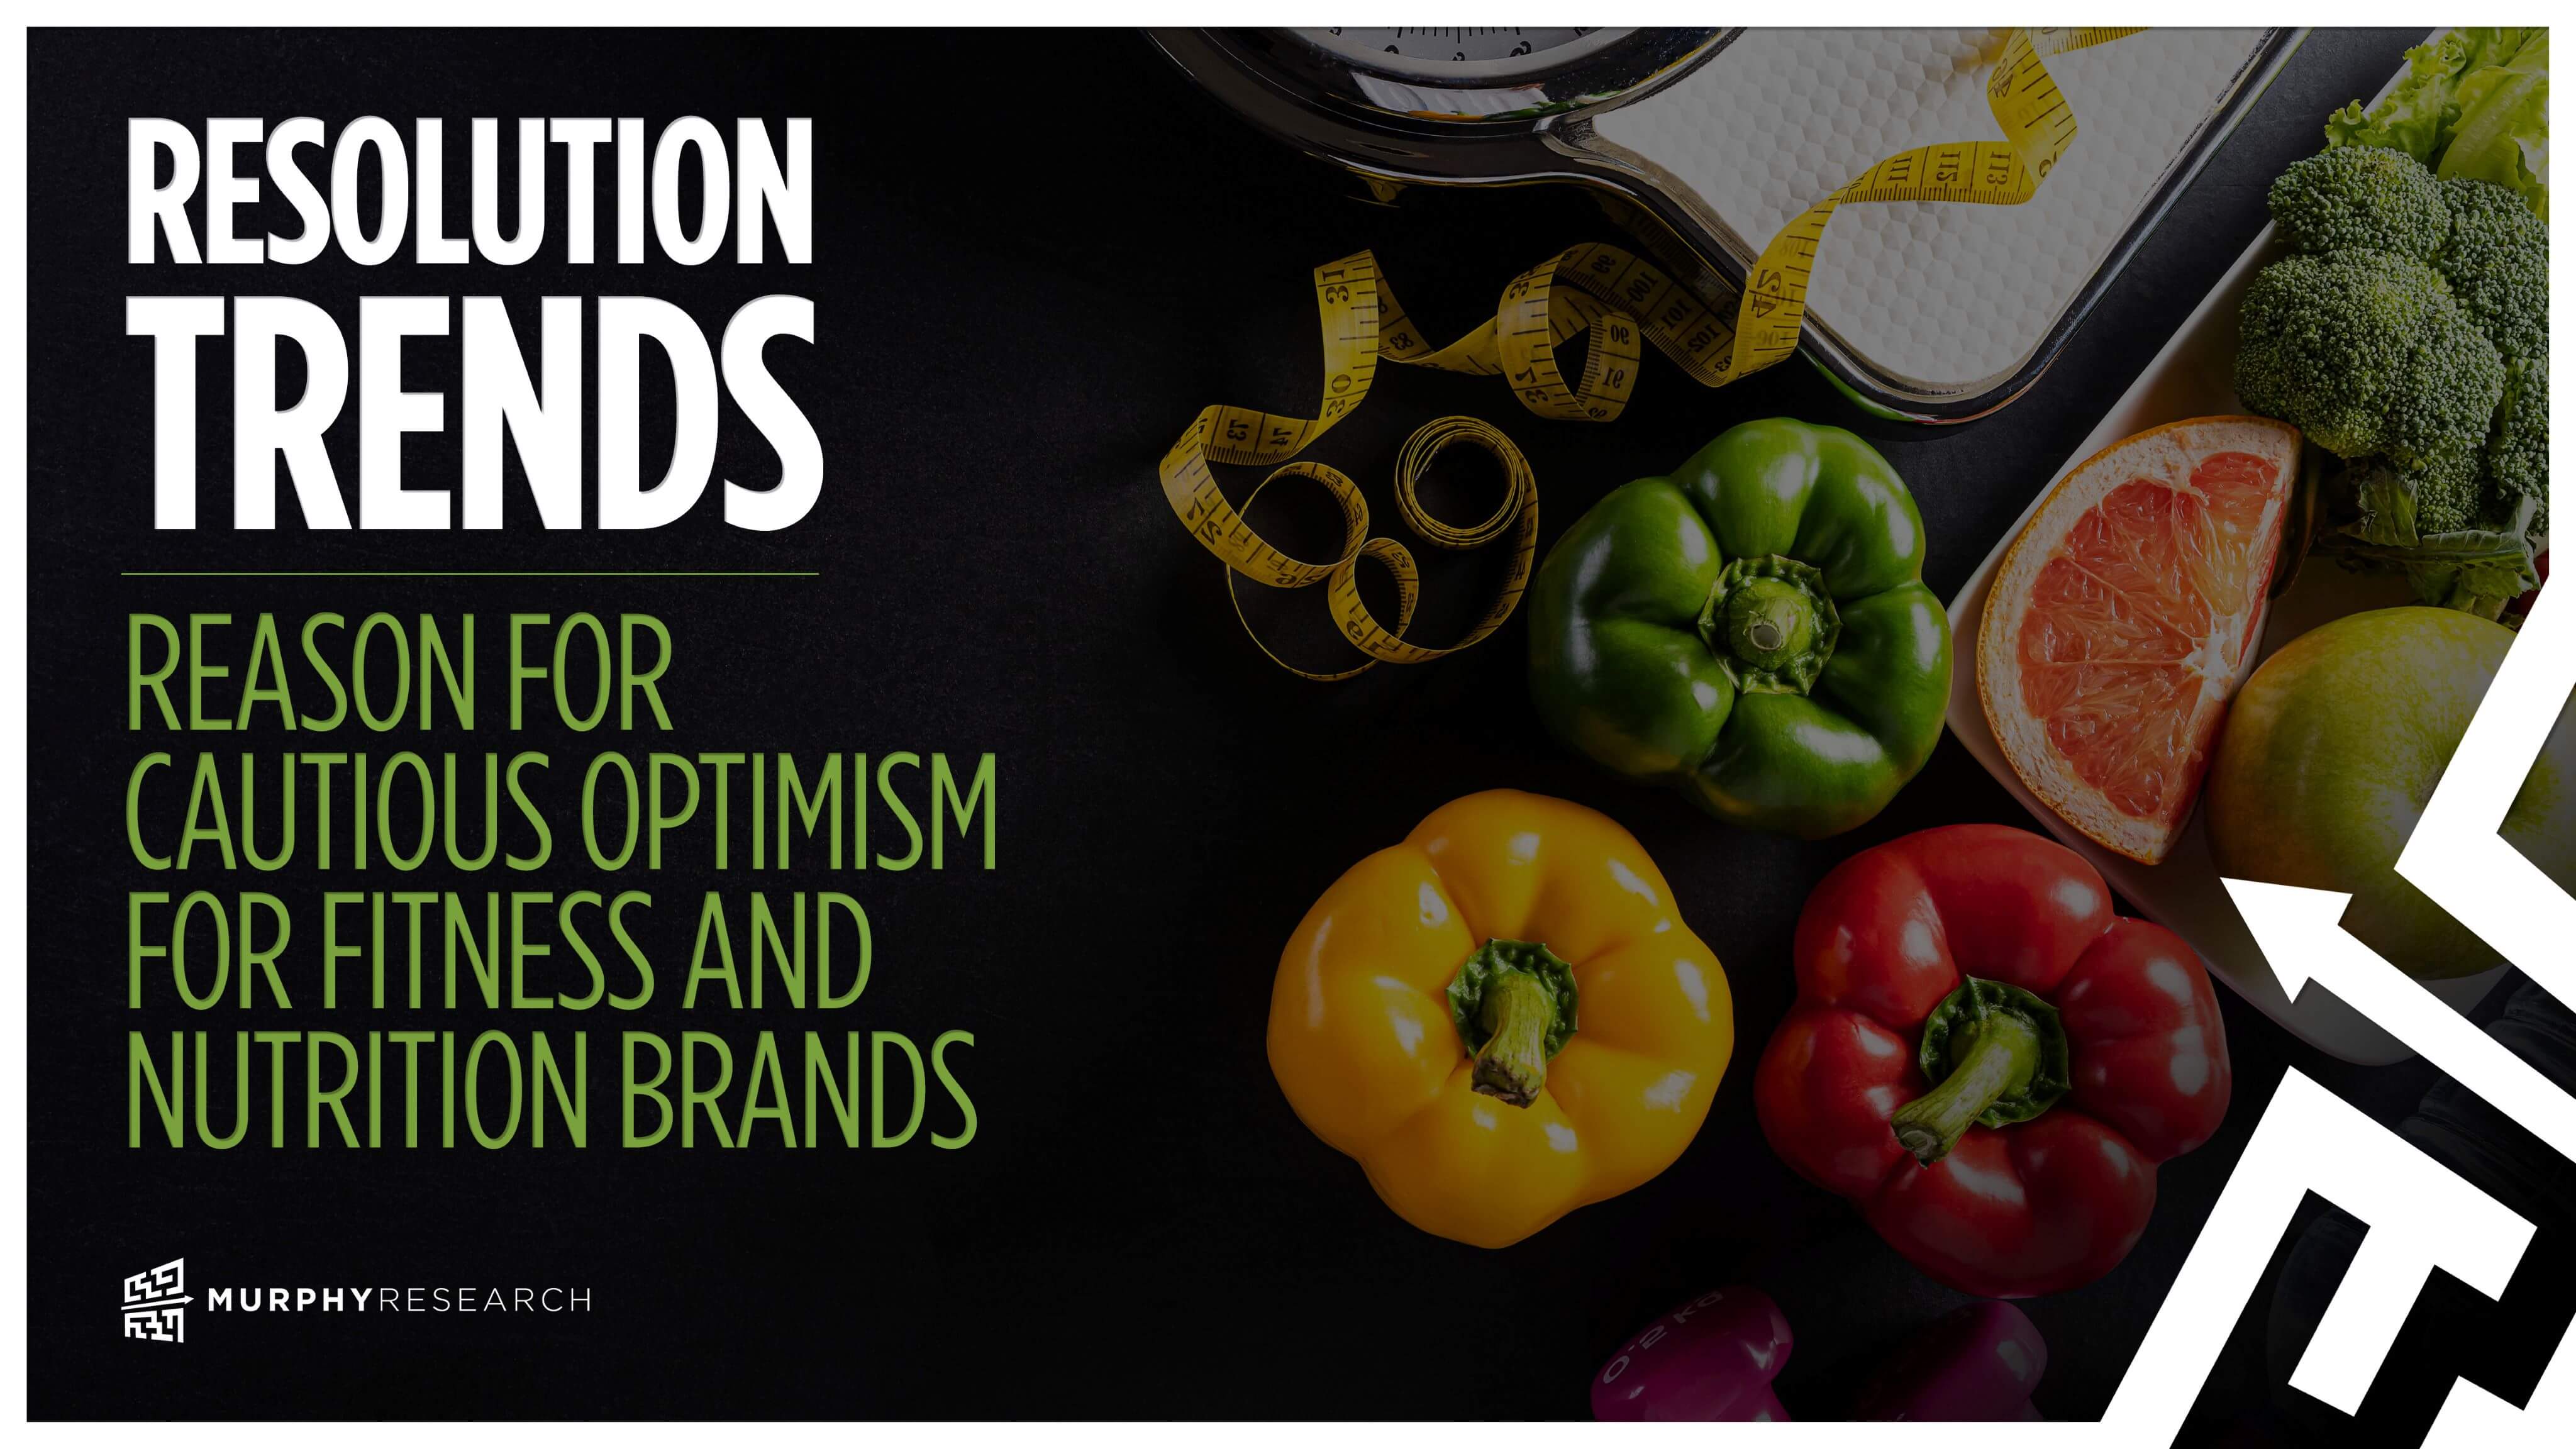 Resolution Trends Indicate Cautious Optimism for Fitness and Nutrition Brands